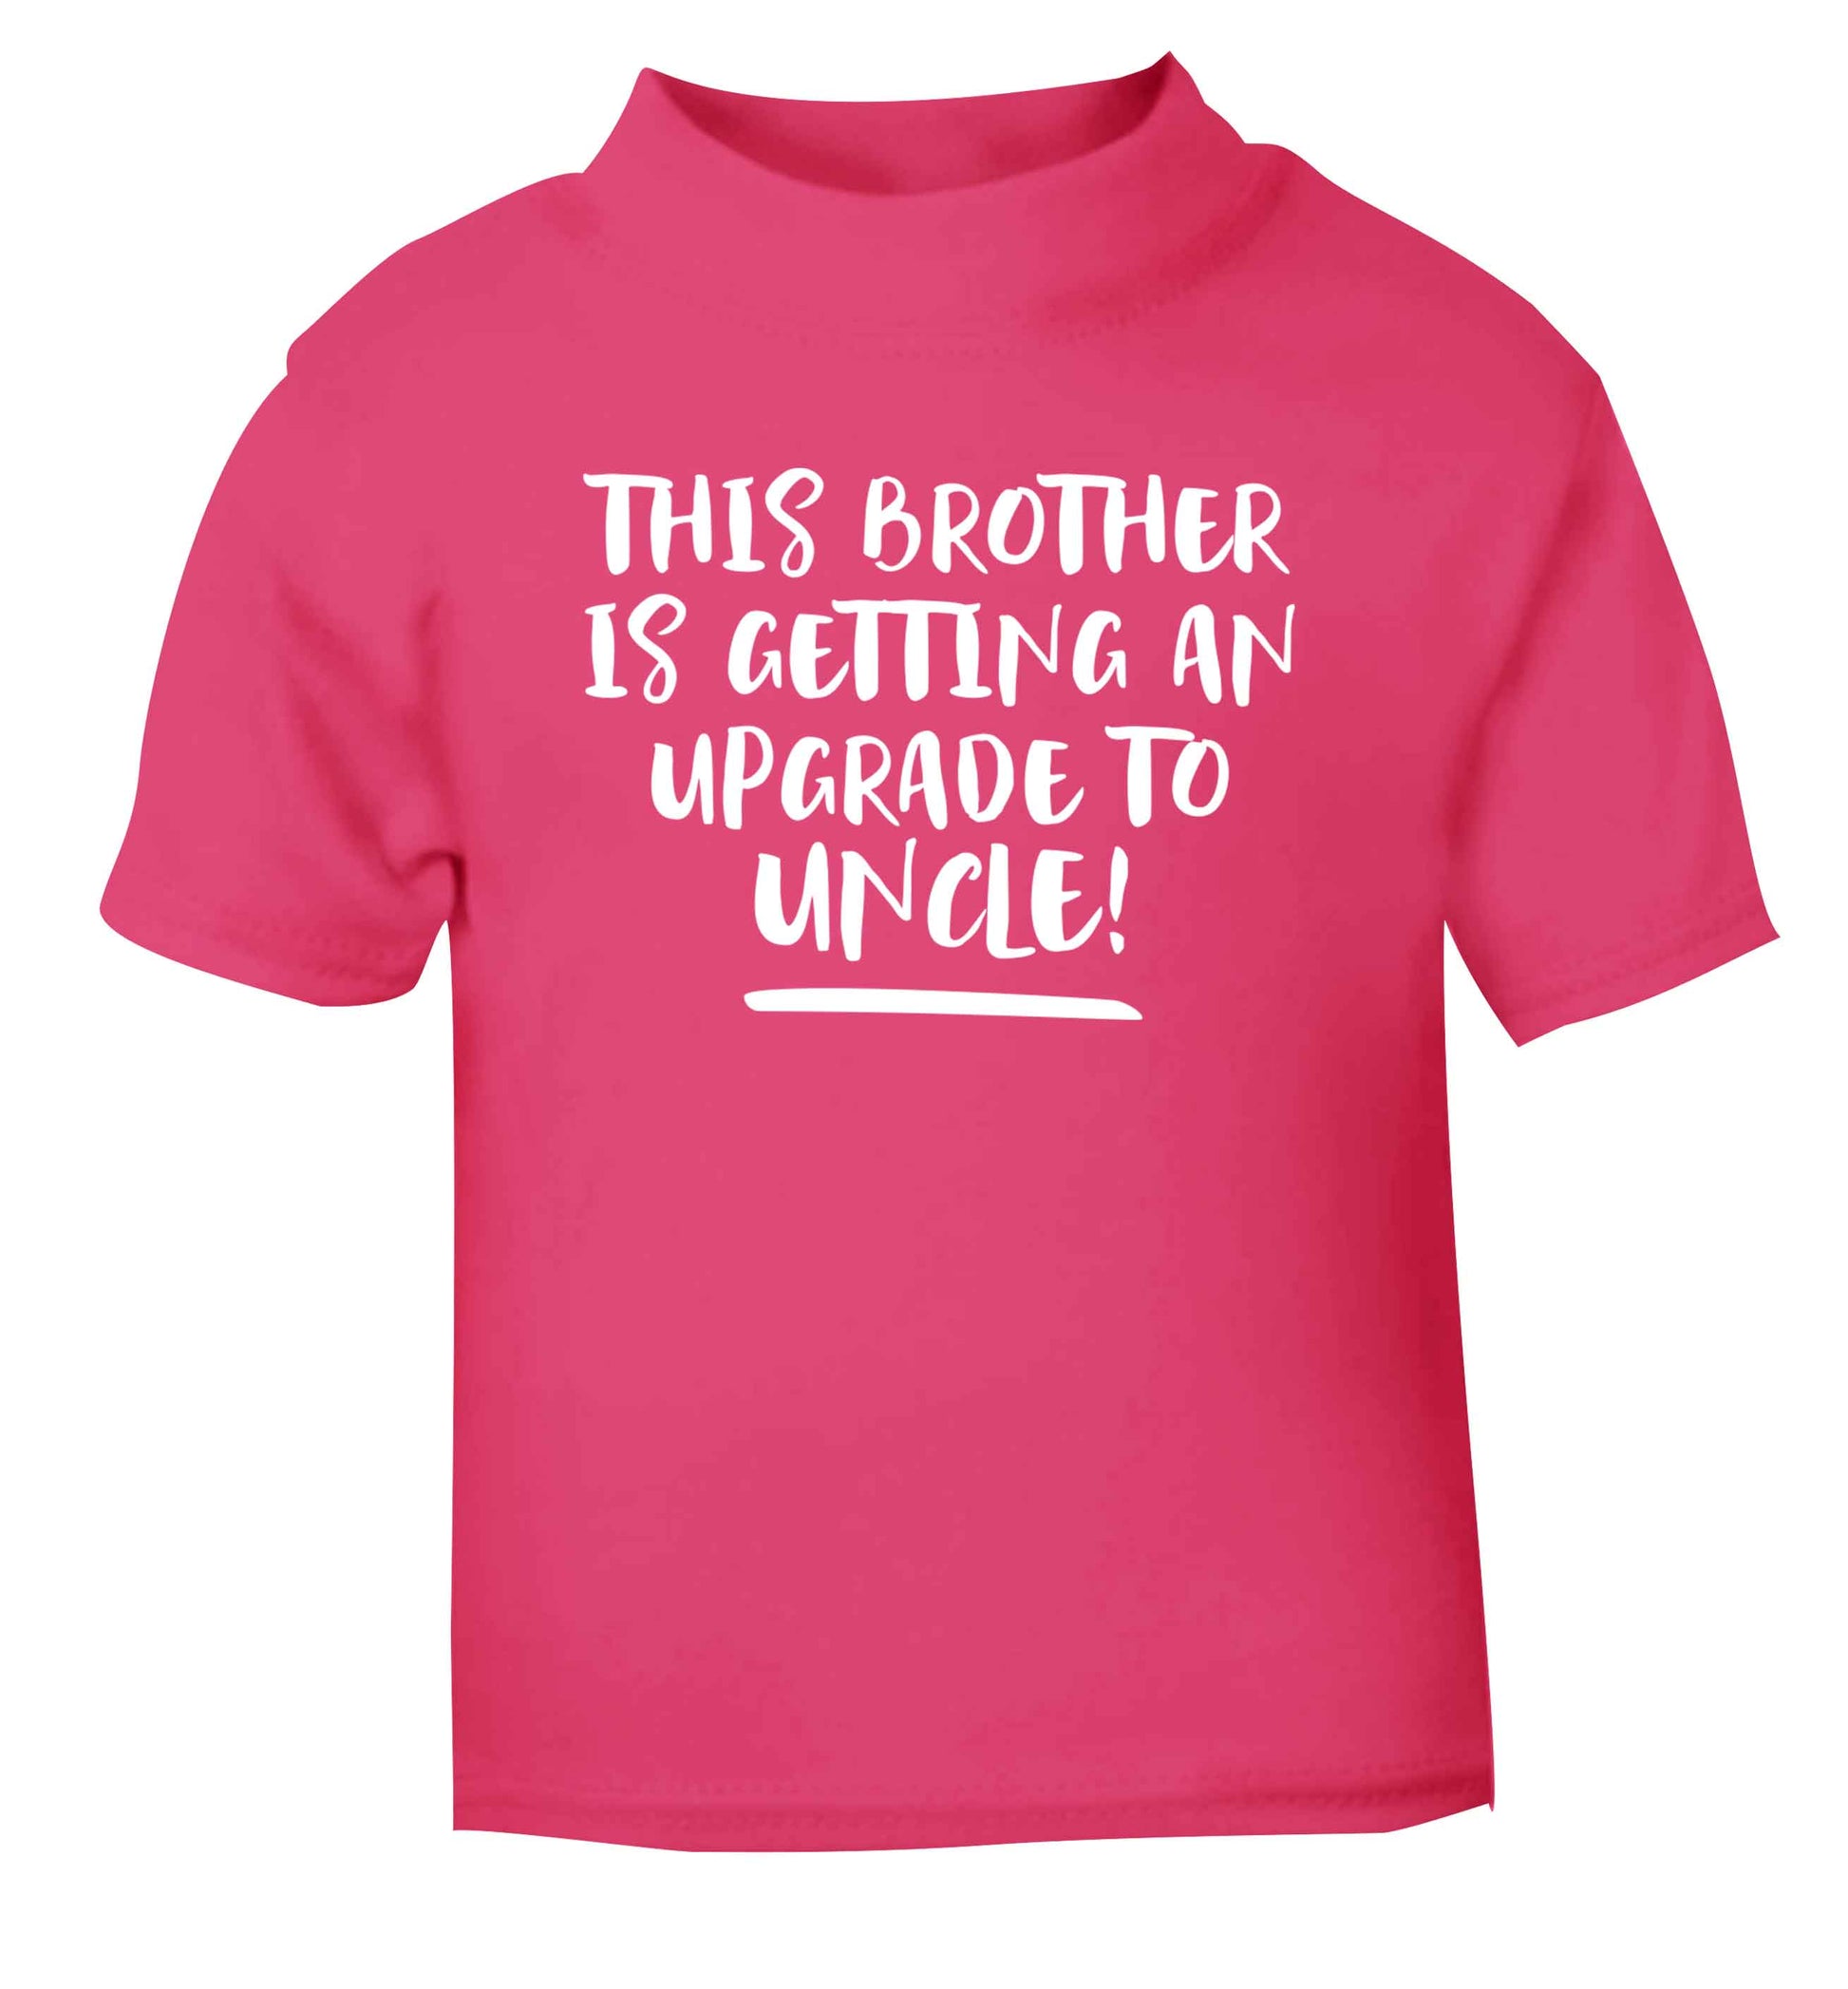 This brother is getting an upgrade to uncle! pink Baby Toddler Tshirt 2 Years